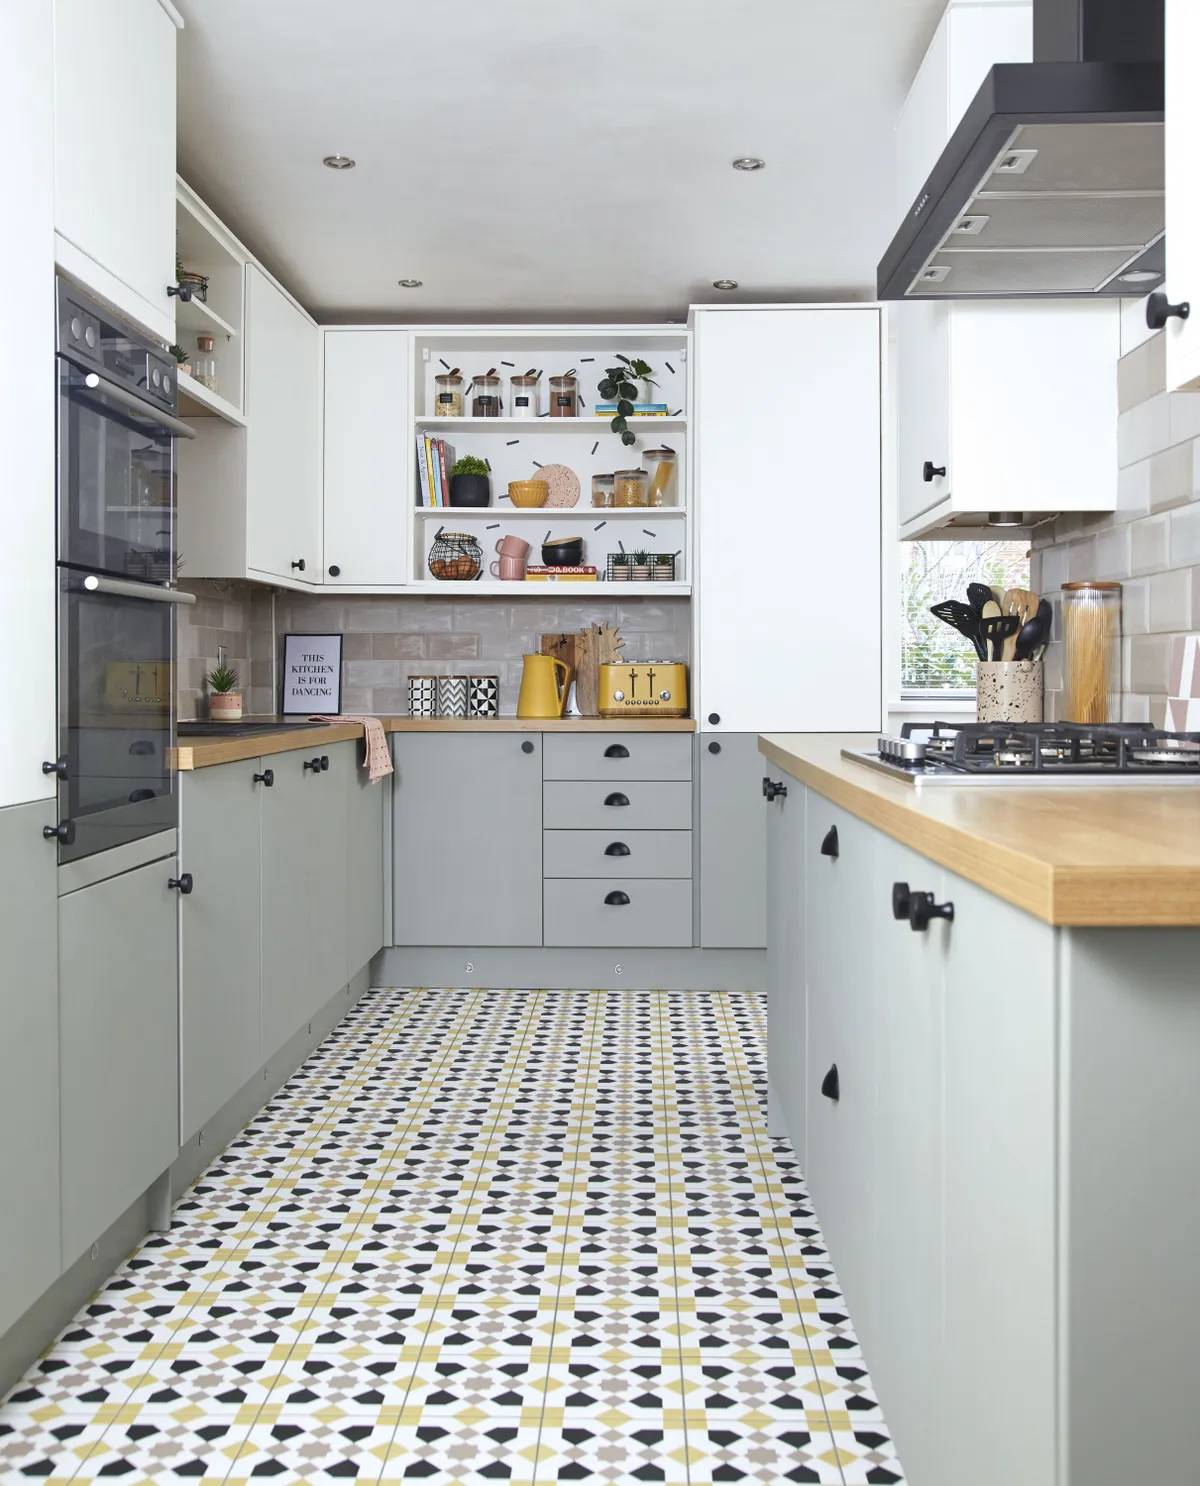 ‘This is exactly the same kitchen with the same units, worktops and wall tiles as when we first moved in, but we painted the low doors in Pigeon and the top in Wimborne White by Farrow & Ball, using a colour match service to save money, and then we replaced the handles and now I really like it!’